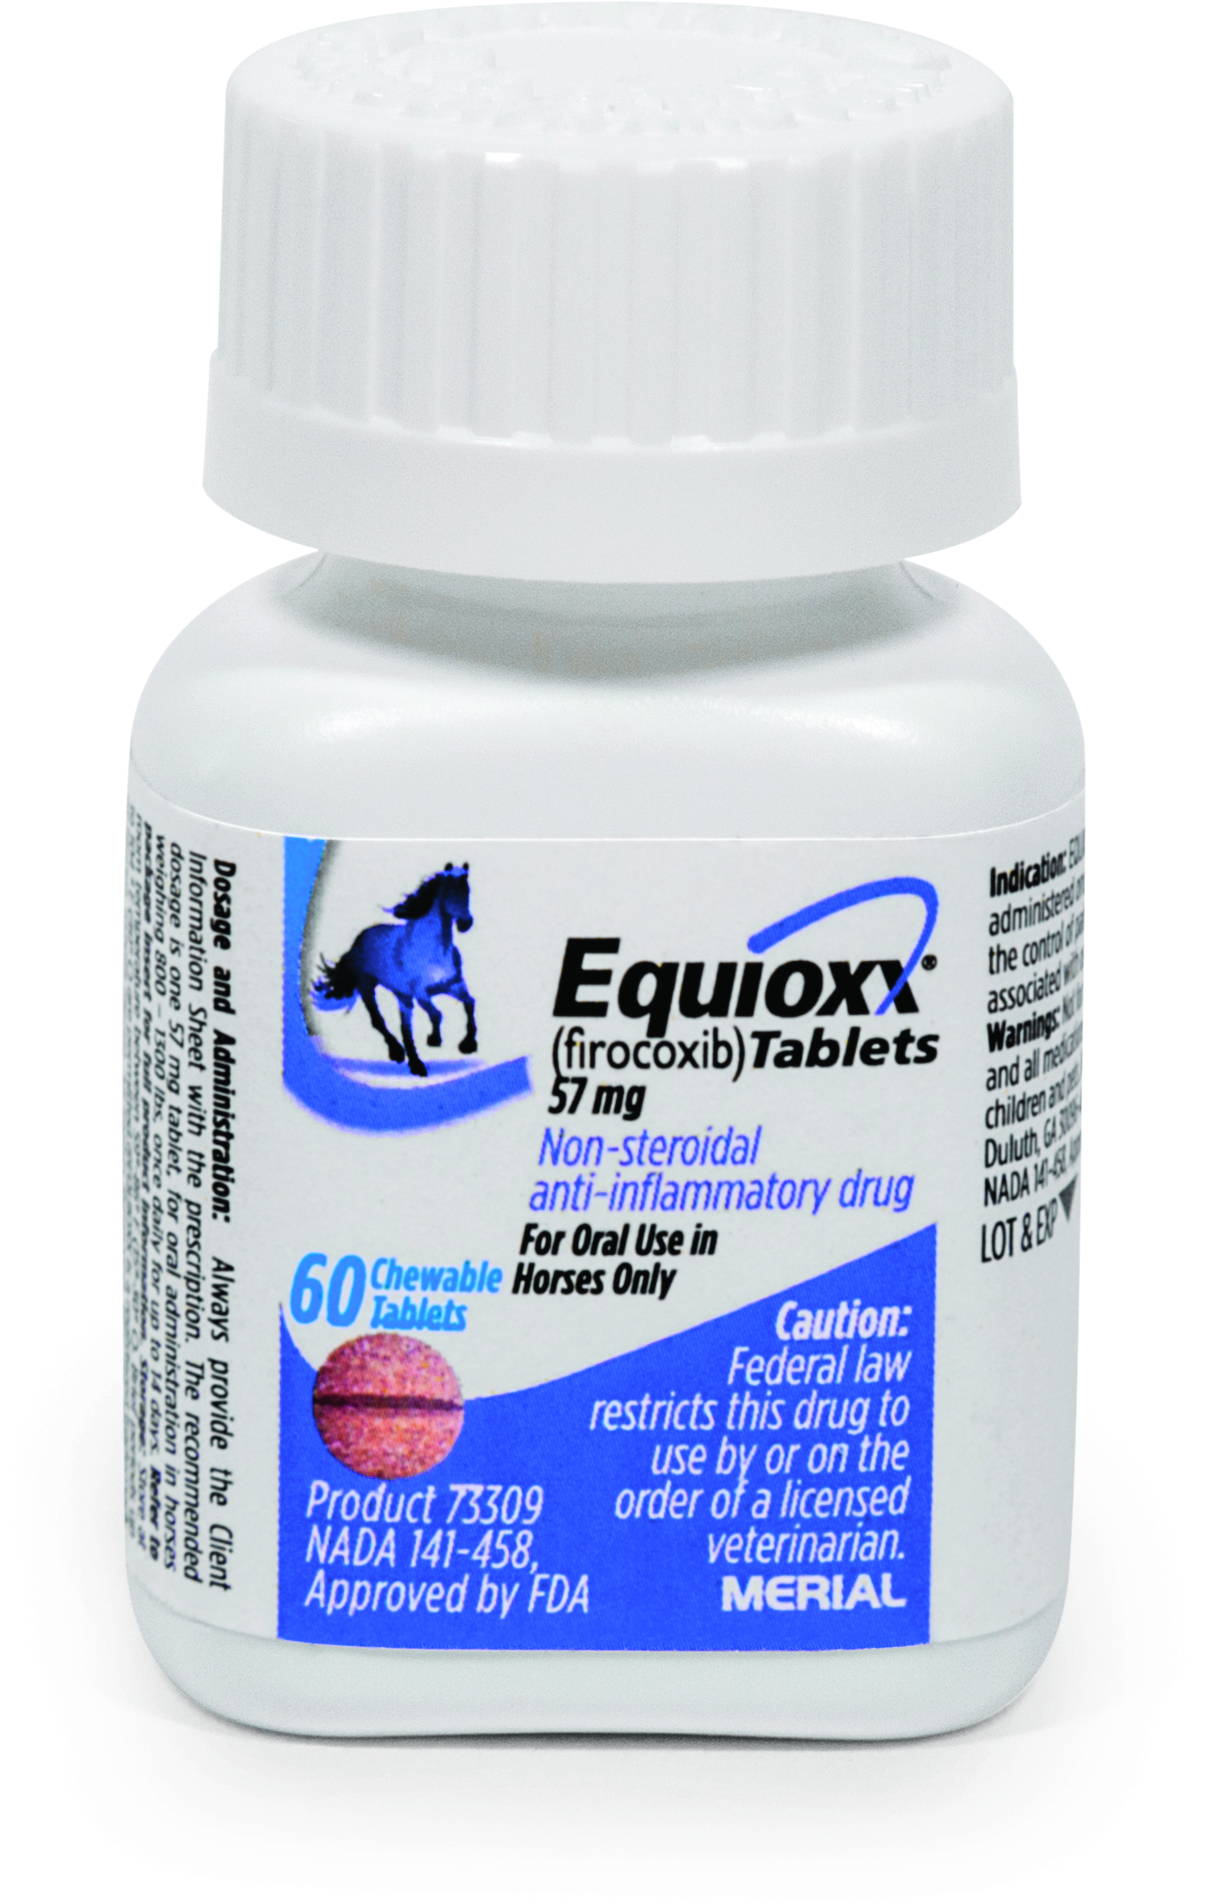 EQUIOXX® Now Available For Horses in Tablet Form